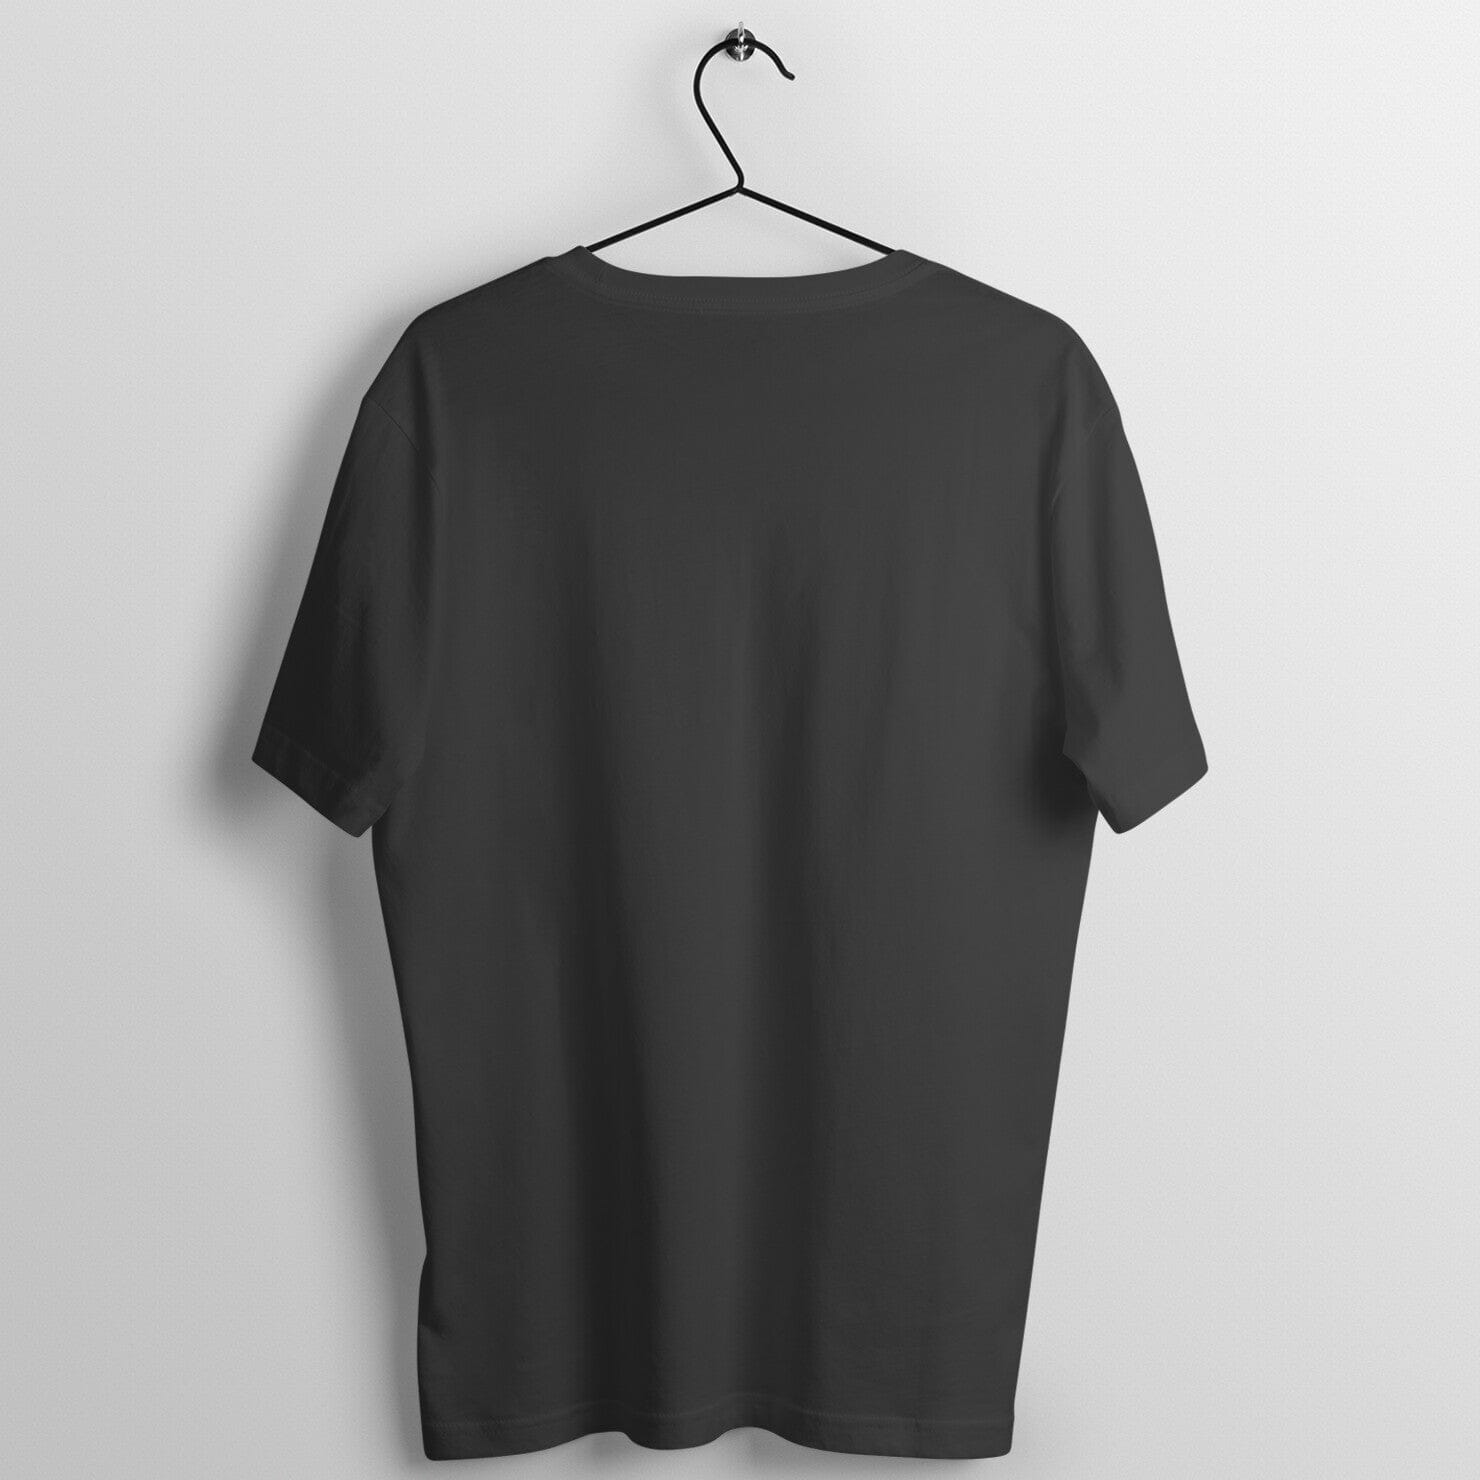 The Total Package Exclusive Black T Shirt for Men and Women Printrove 